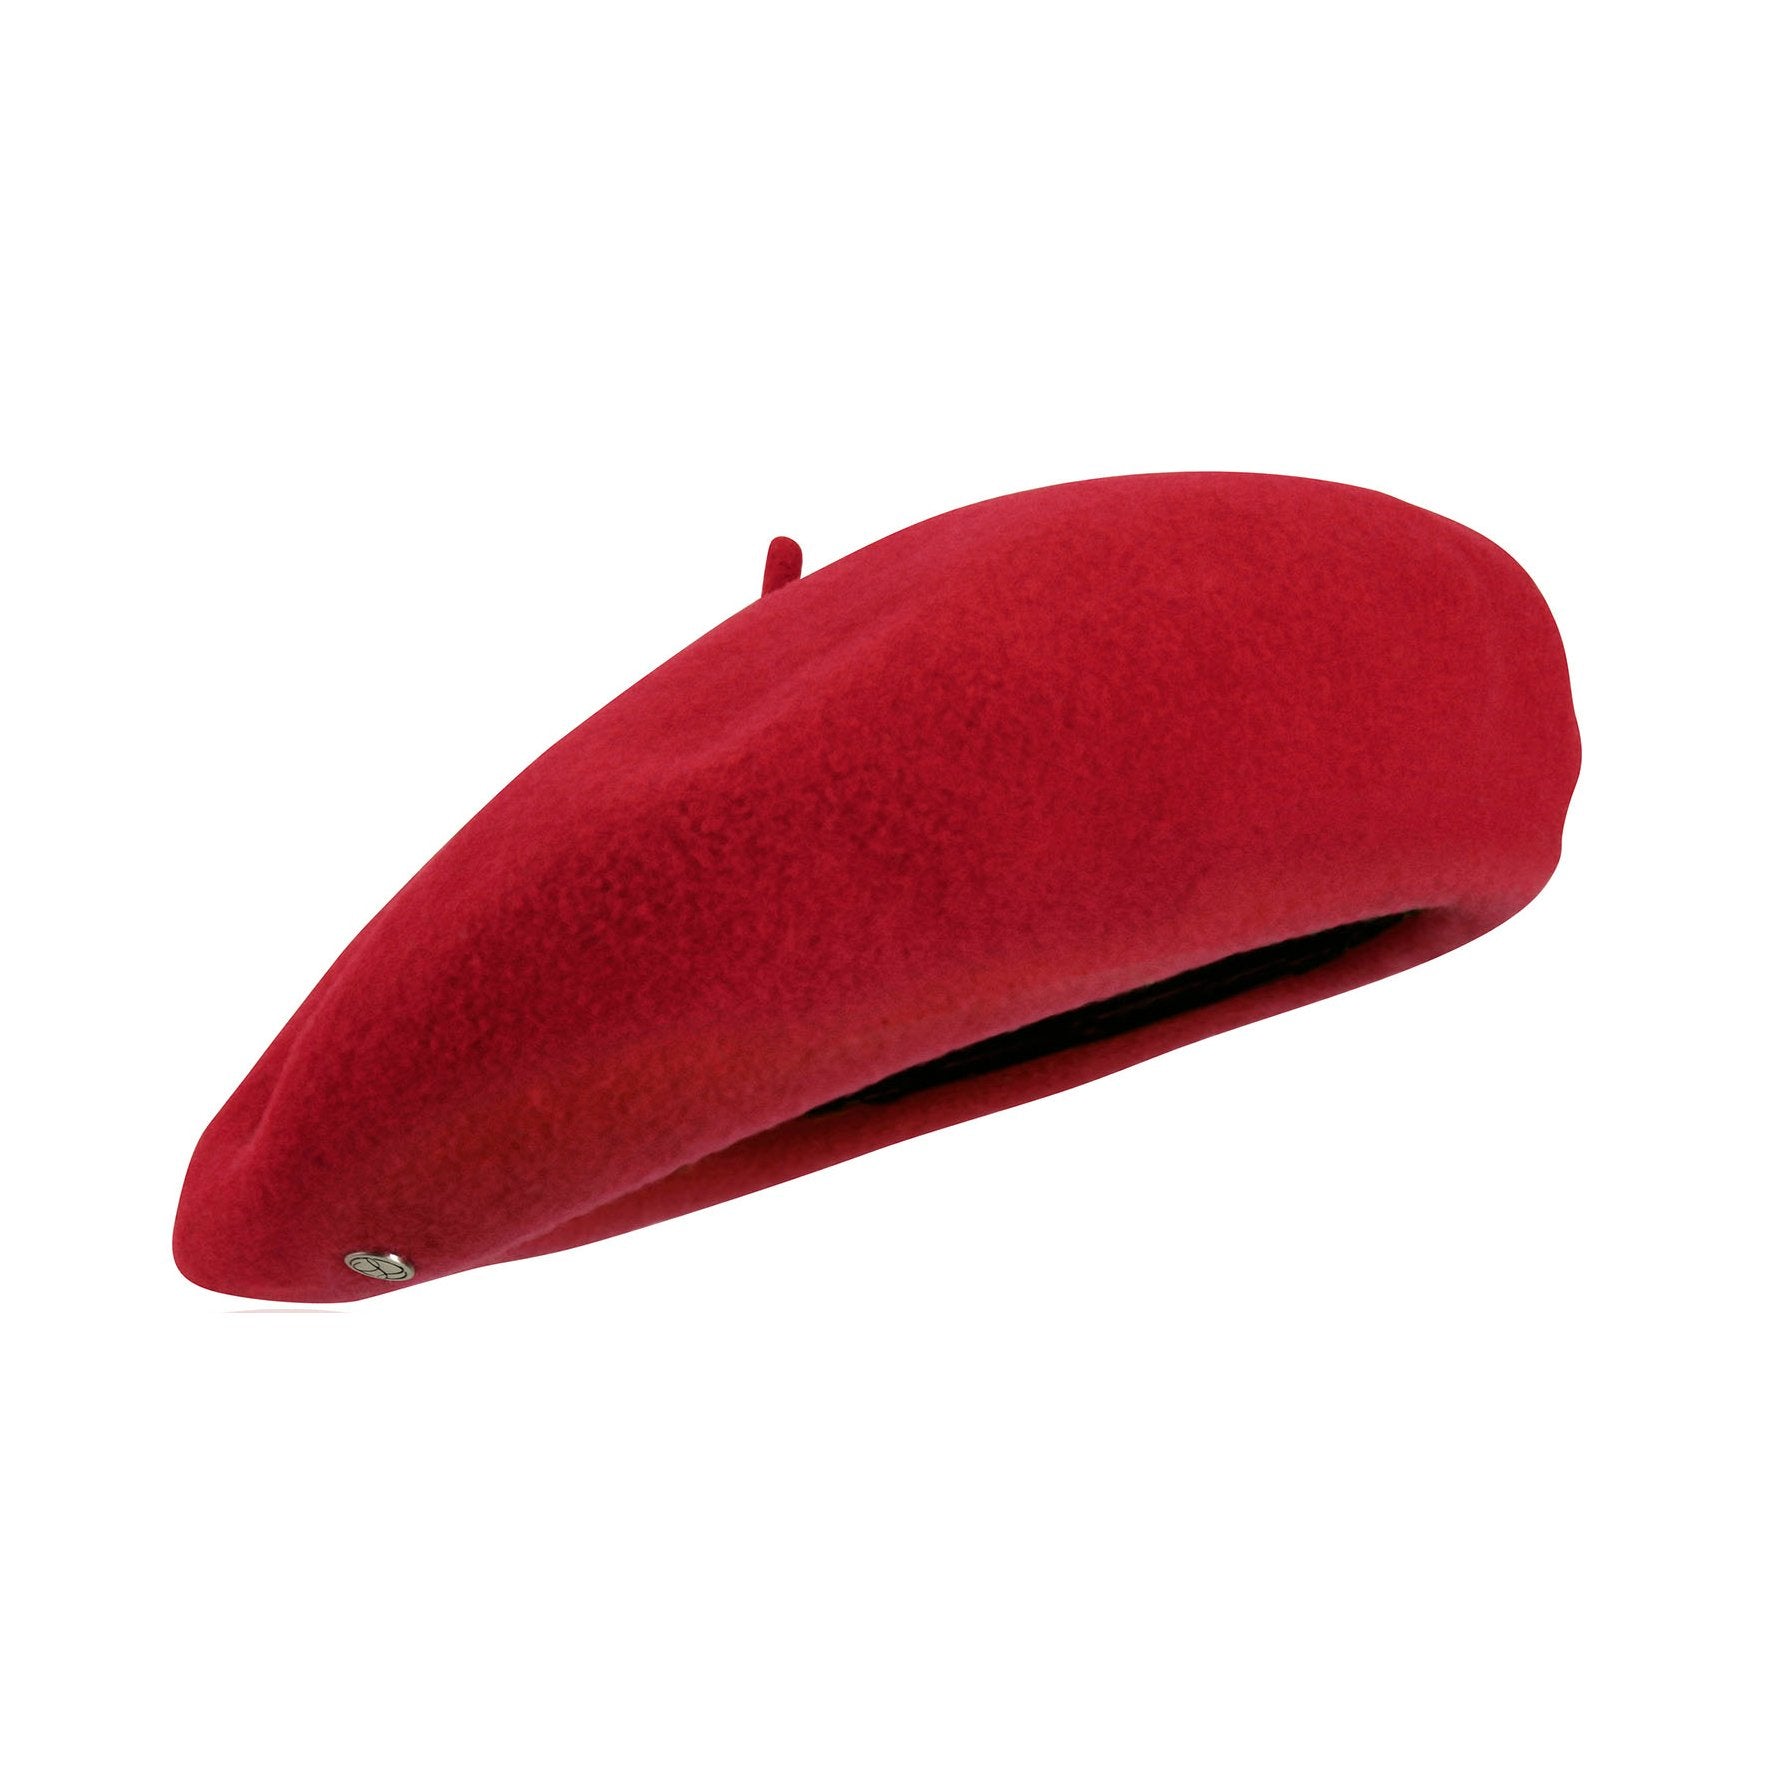 Heritage by Laulhere | Authentic French Beret | Hermes | Red Noir Merino Wool Beret | buy now at The Cashmere Choice London